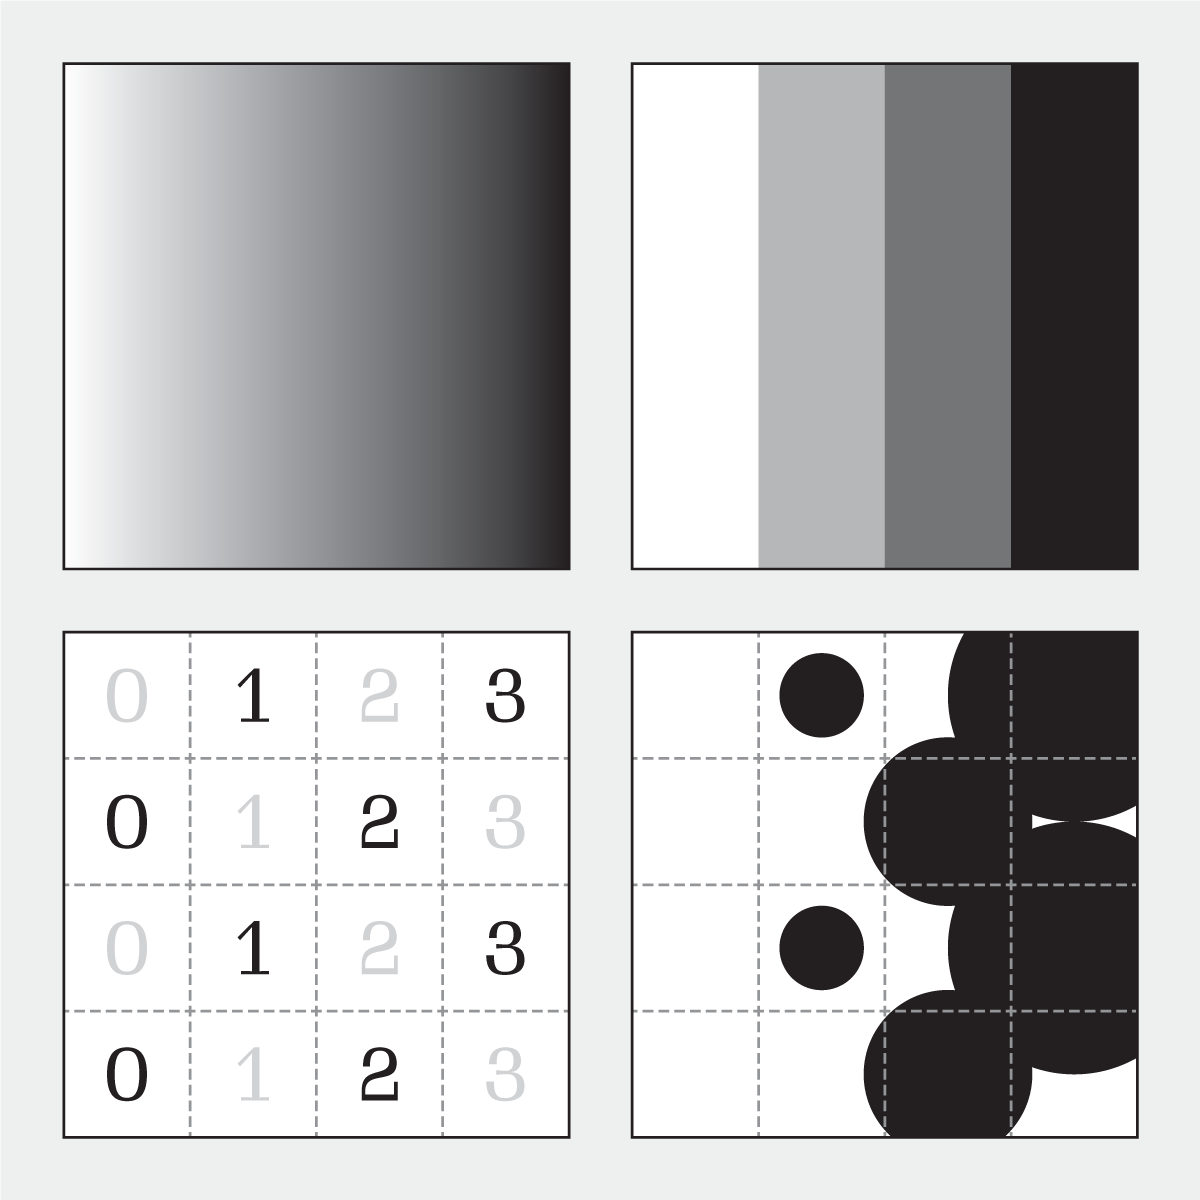 Four squares are shown. The top left square (a) is a smooth gradation of white to black from left to right. The top right square (b) is four vertical stripes: white, light gray, dark gray, and black, from left to right. The bottom left square (c) is a four-by-four grid of numbers. The numbers in the left column are all 0, and each successive column to the right contains 1, 2, and 3. Half of the numbers in the grid are black and half are gray; the blacks and grays are arranged in a checkerboard pattern. The final, bottom right square (d) is a four-by-four grid with black dots. The first column is empty. The second column has small black dots in its first and third rows. The third column has mid-sized black dots in its second and fourth rows. The fourth column has large black dots in its first and third rows.